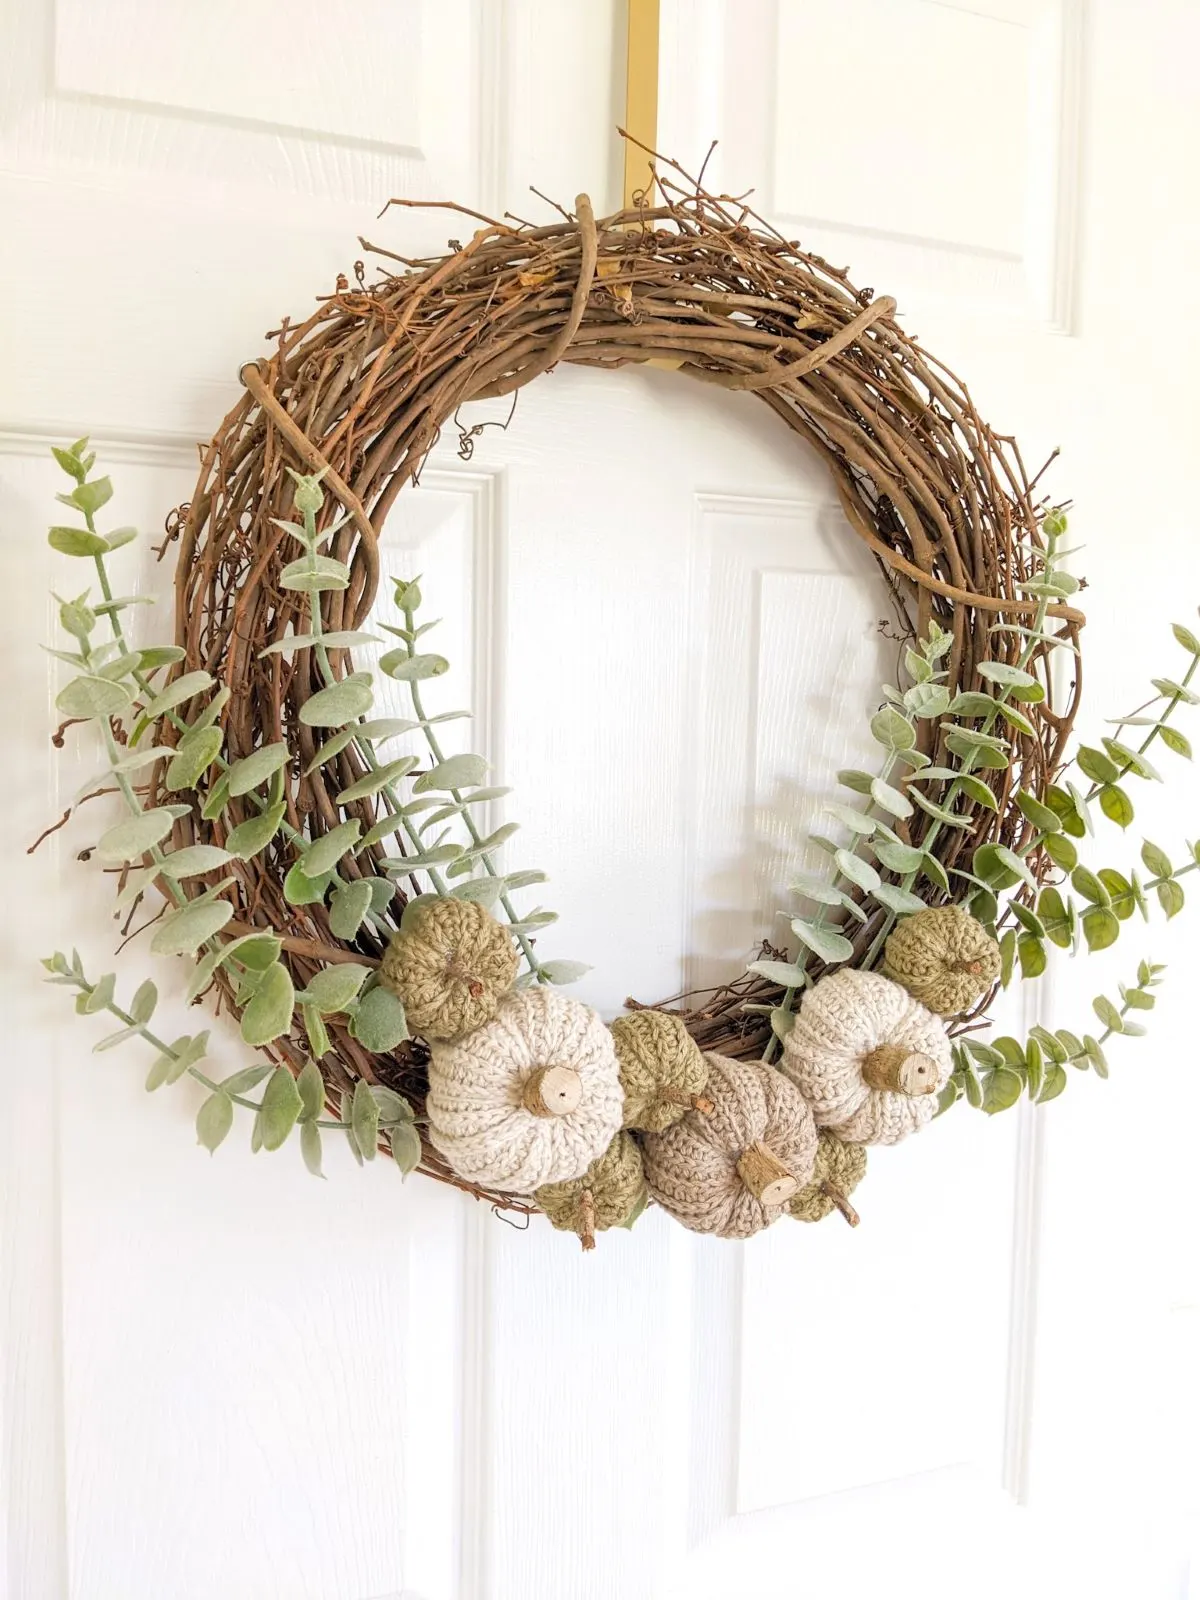 A fall wreath with eucalyptus and crochet pumpkins in 2 different sizes.  